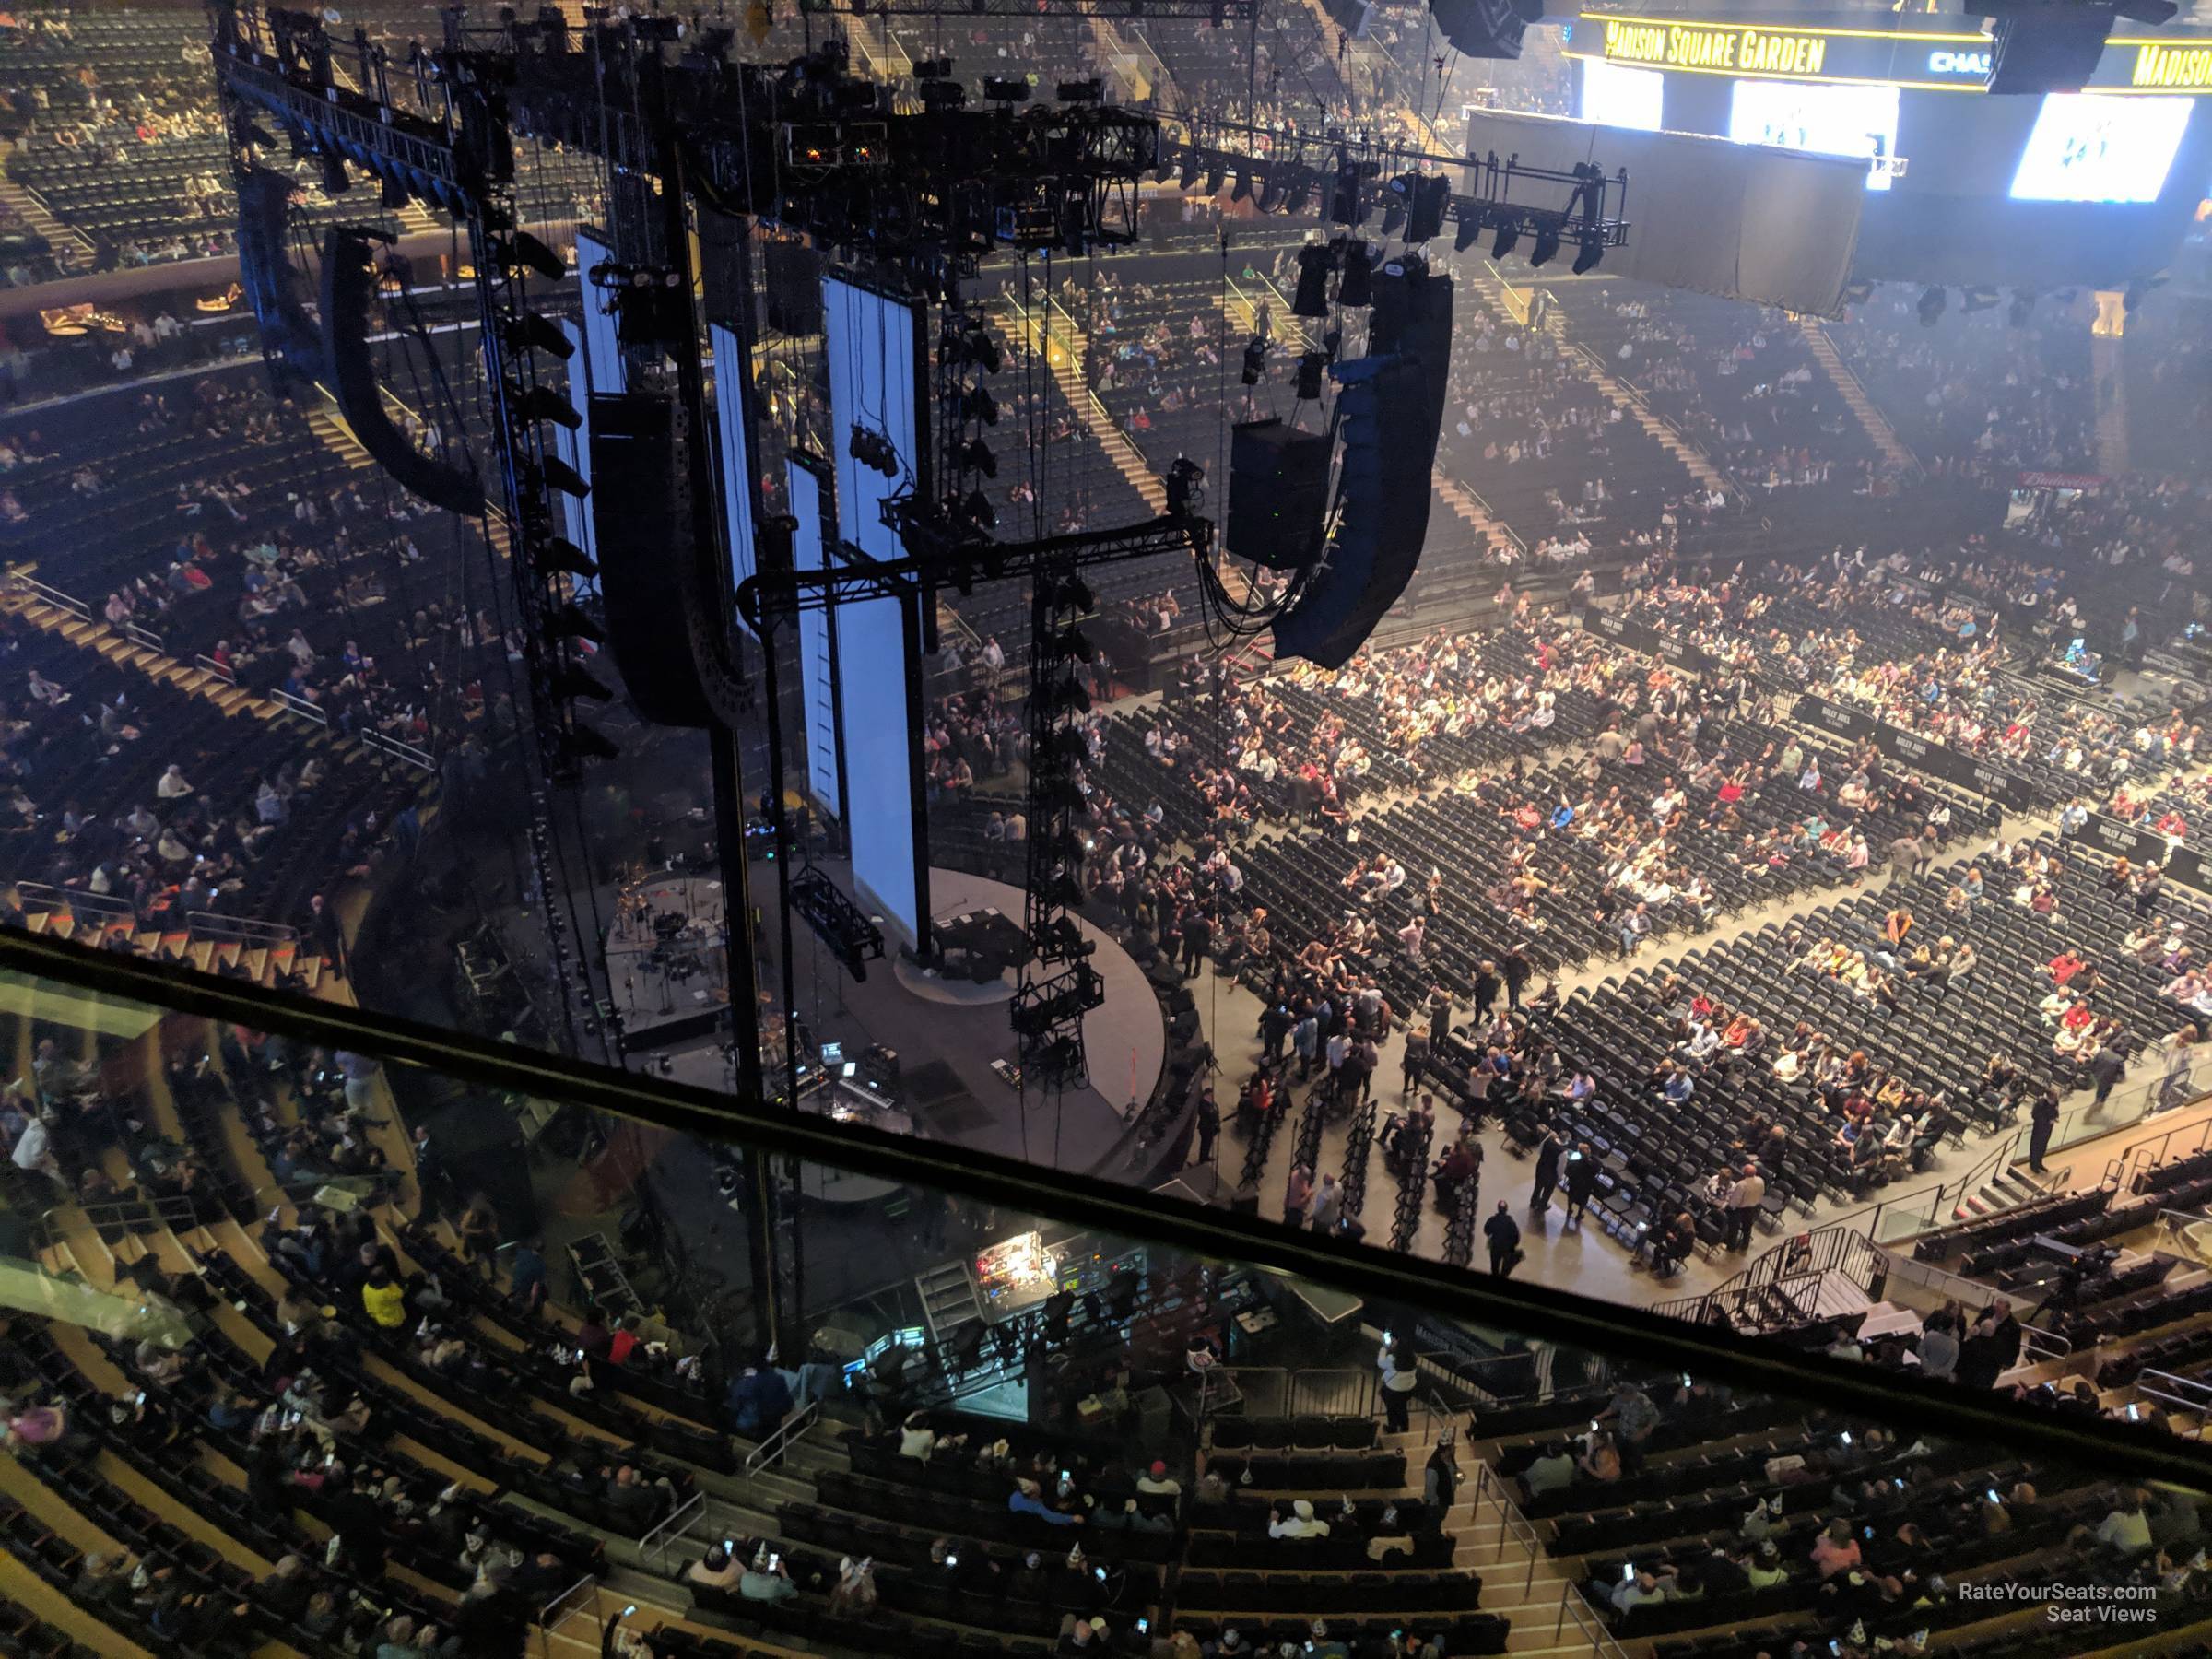 Section 323 at Madison Square Garden for Concerts